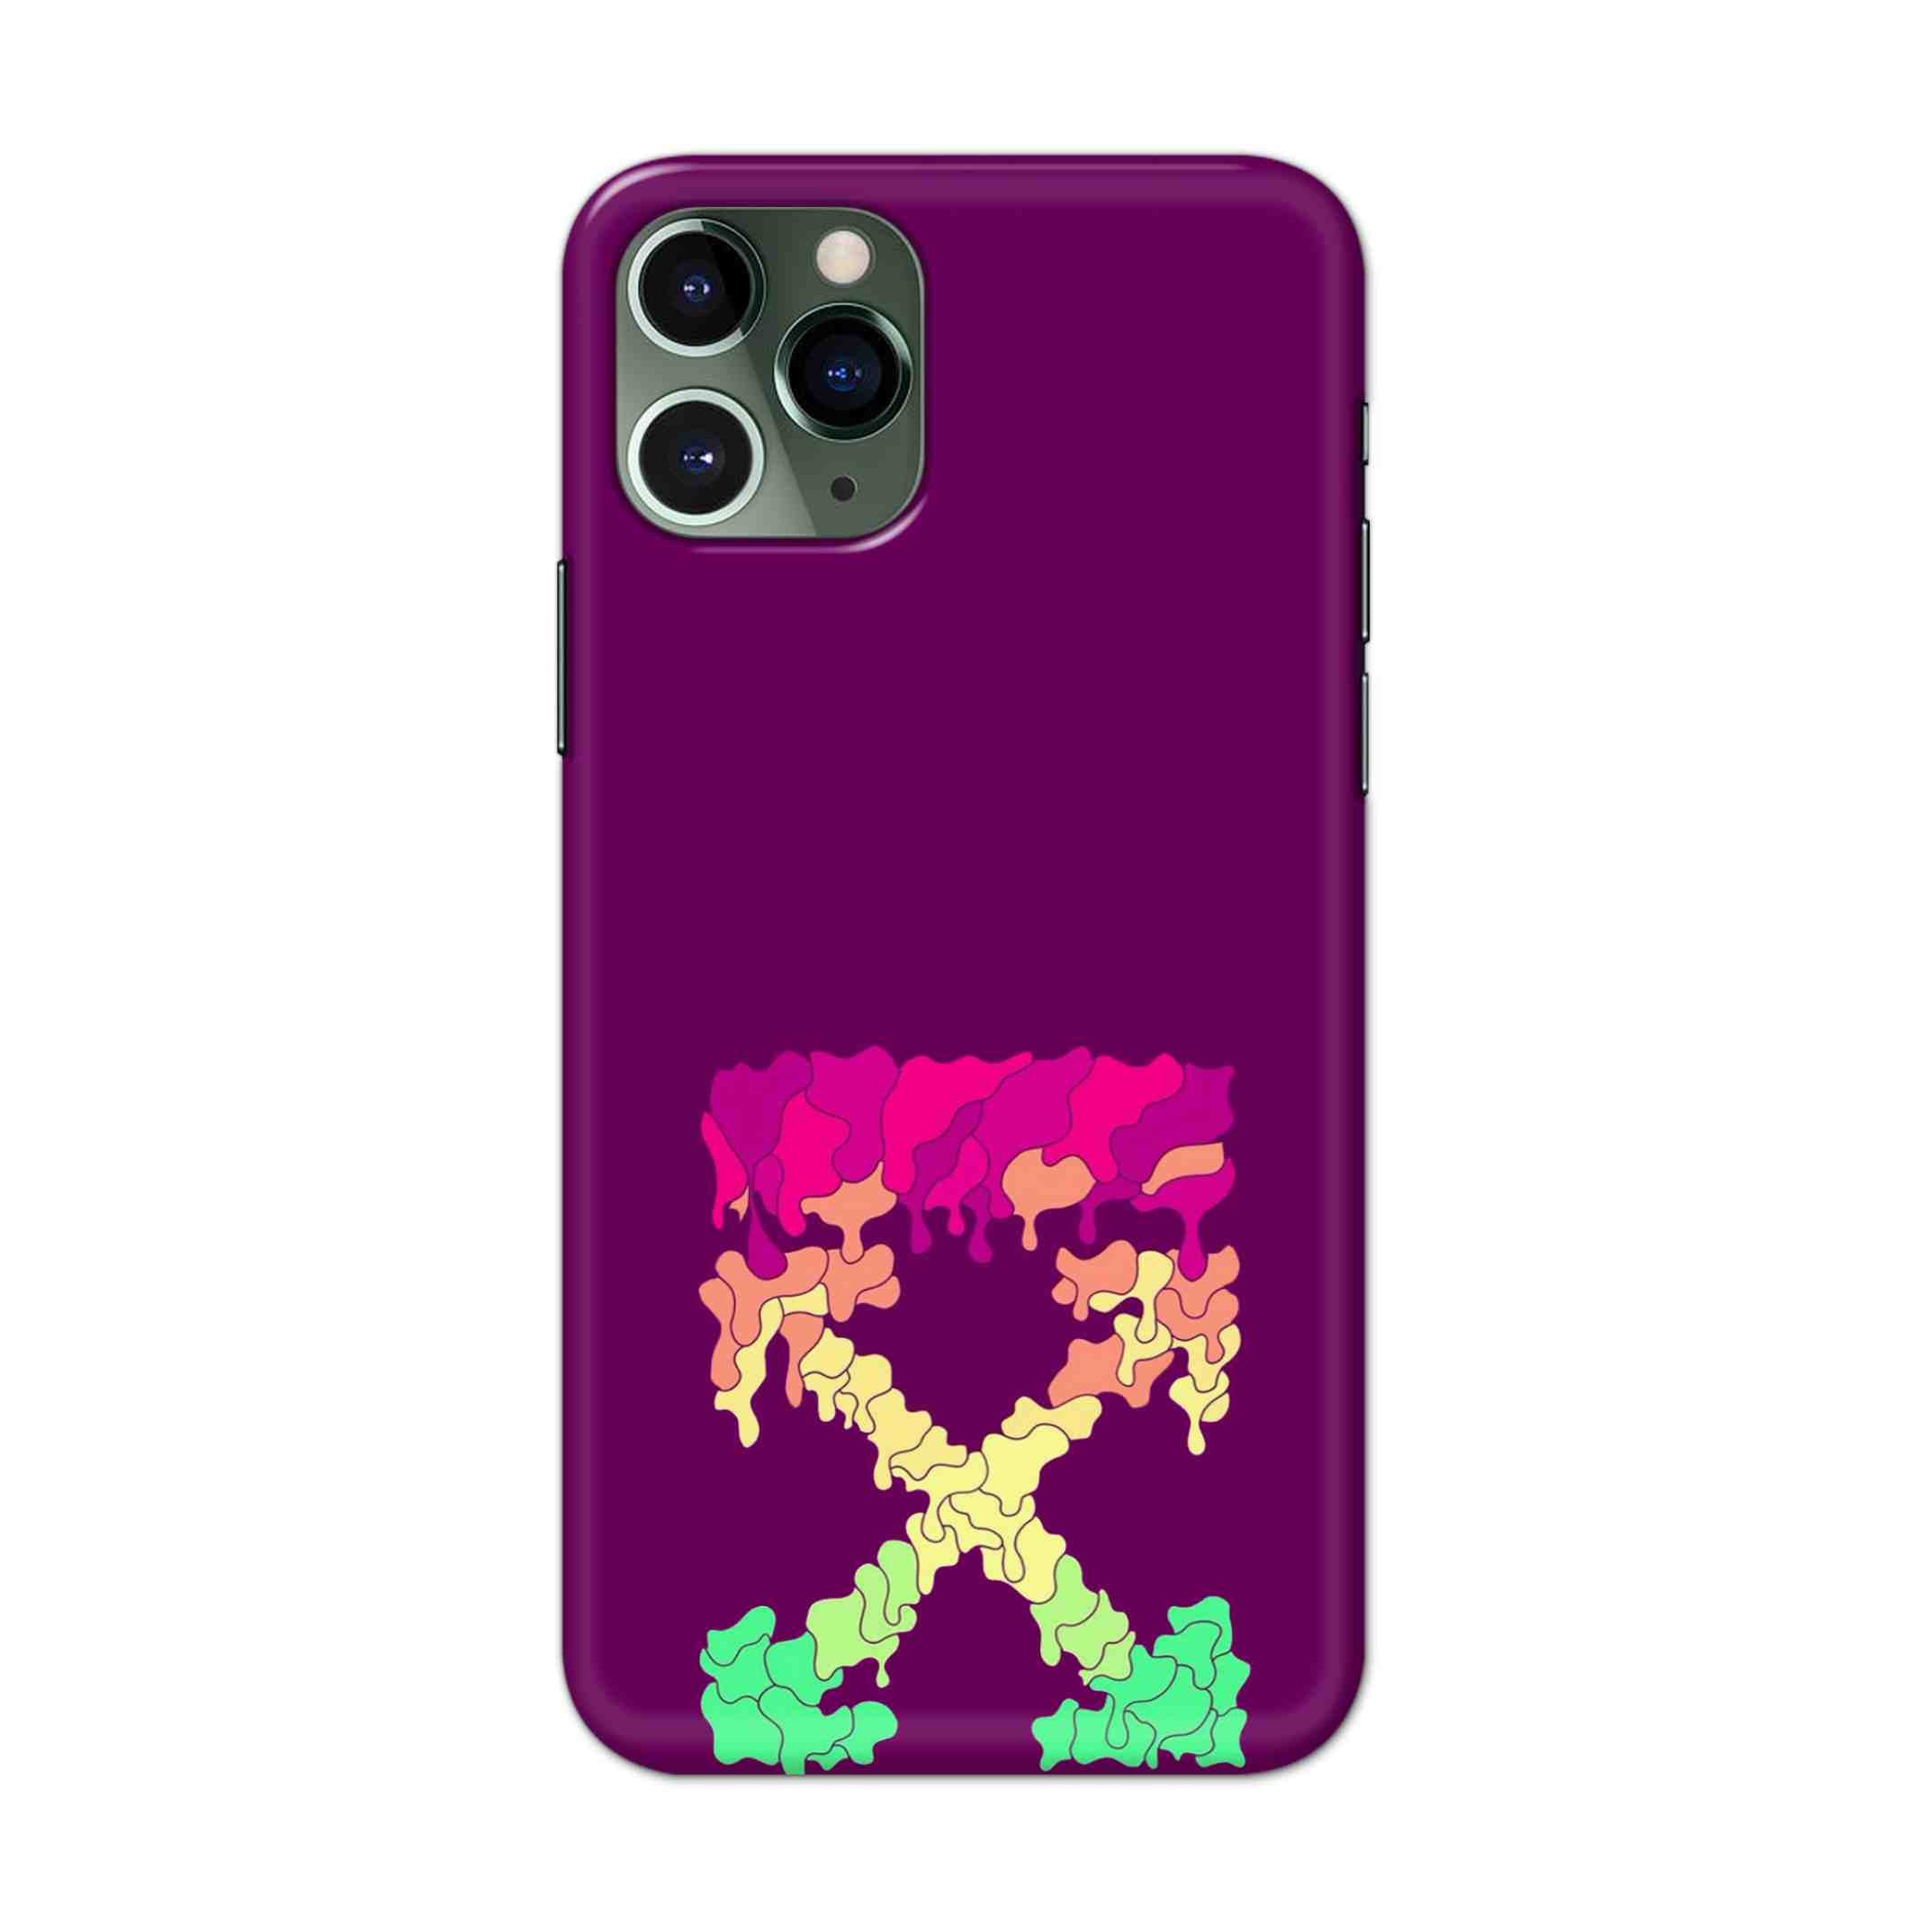 Buy X.O Hard Back Mobile Phone Case/Cover For iPhone 11 Pro Online